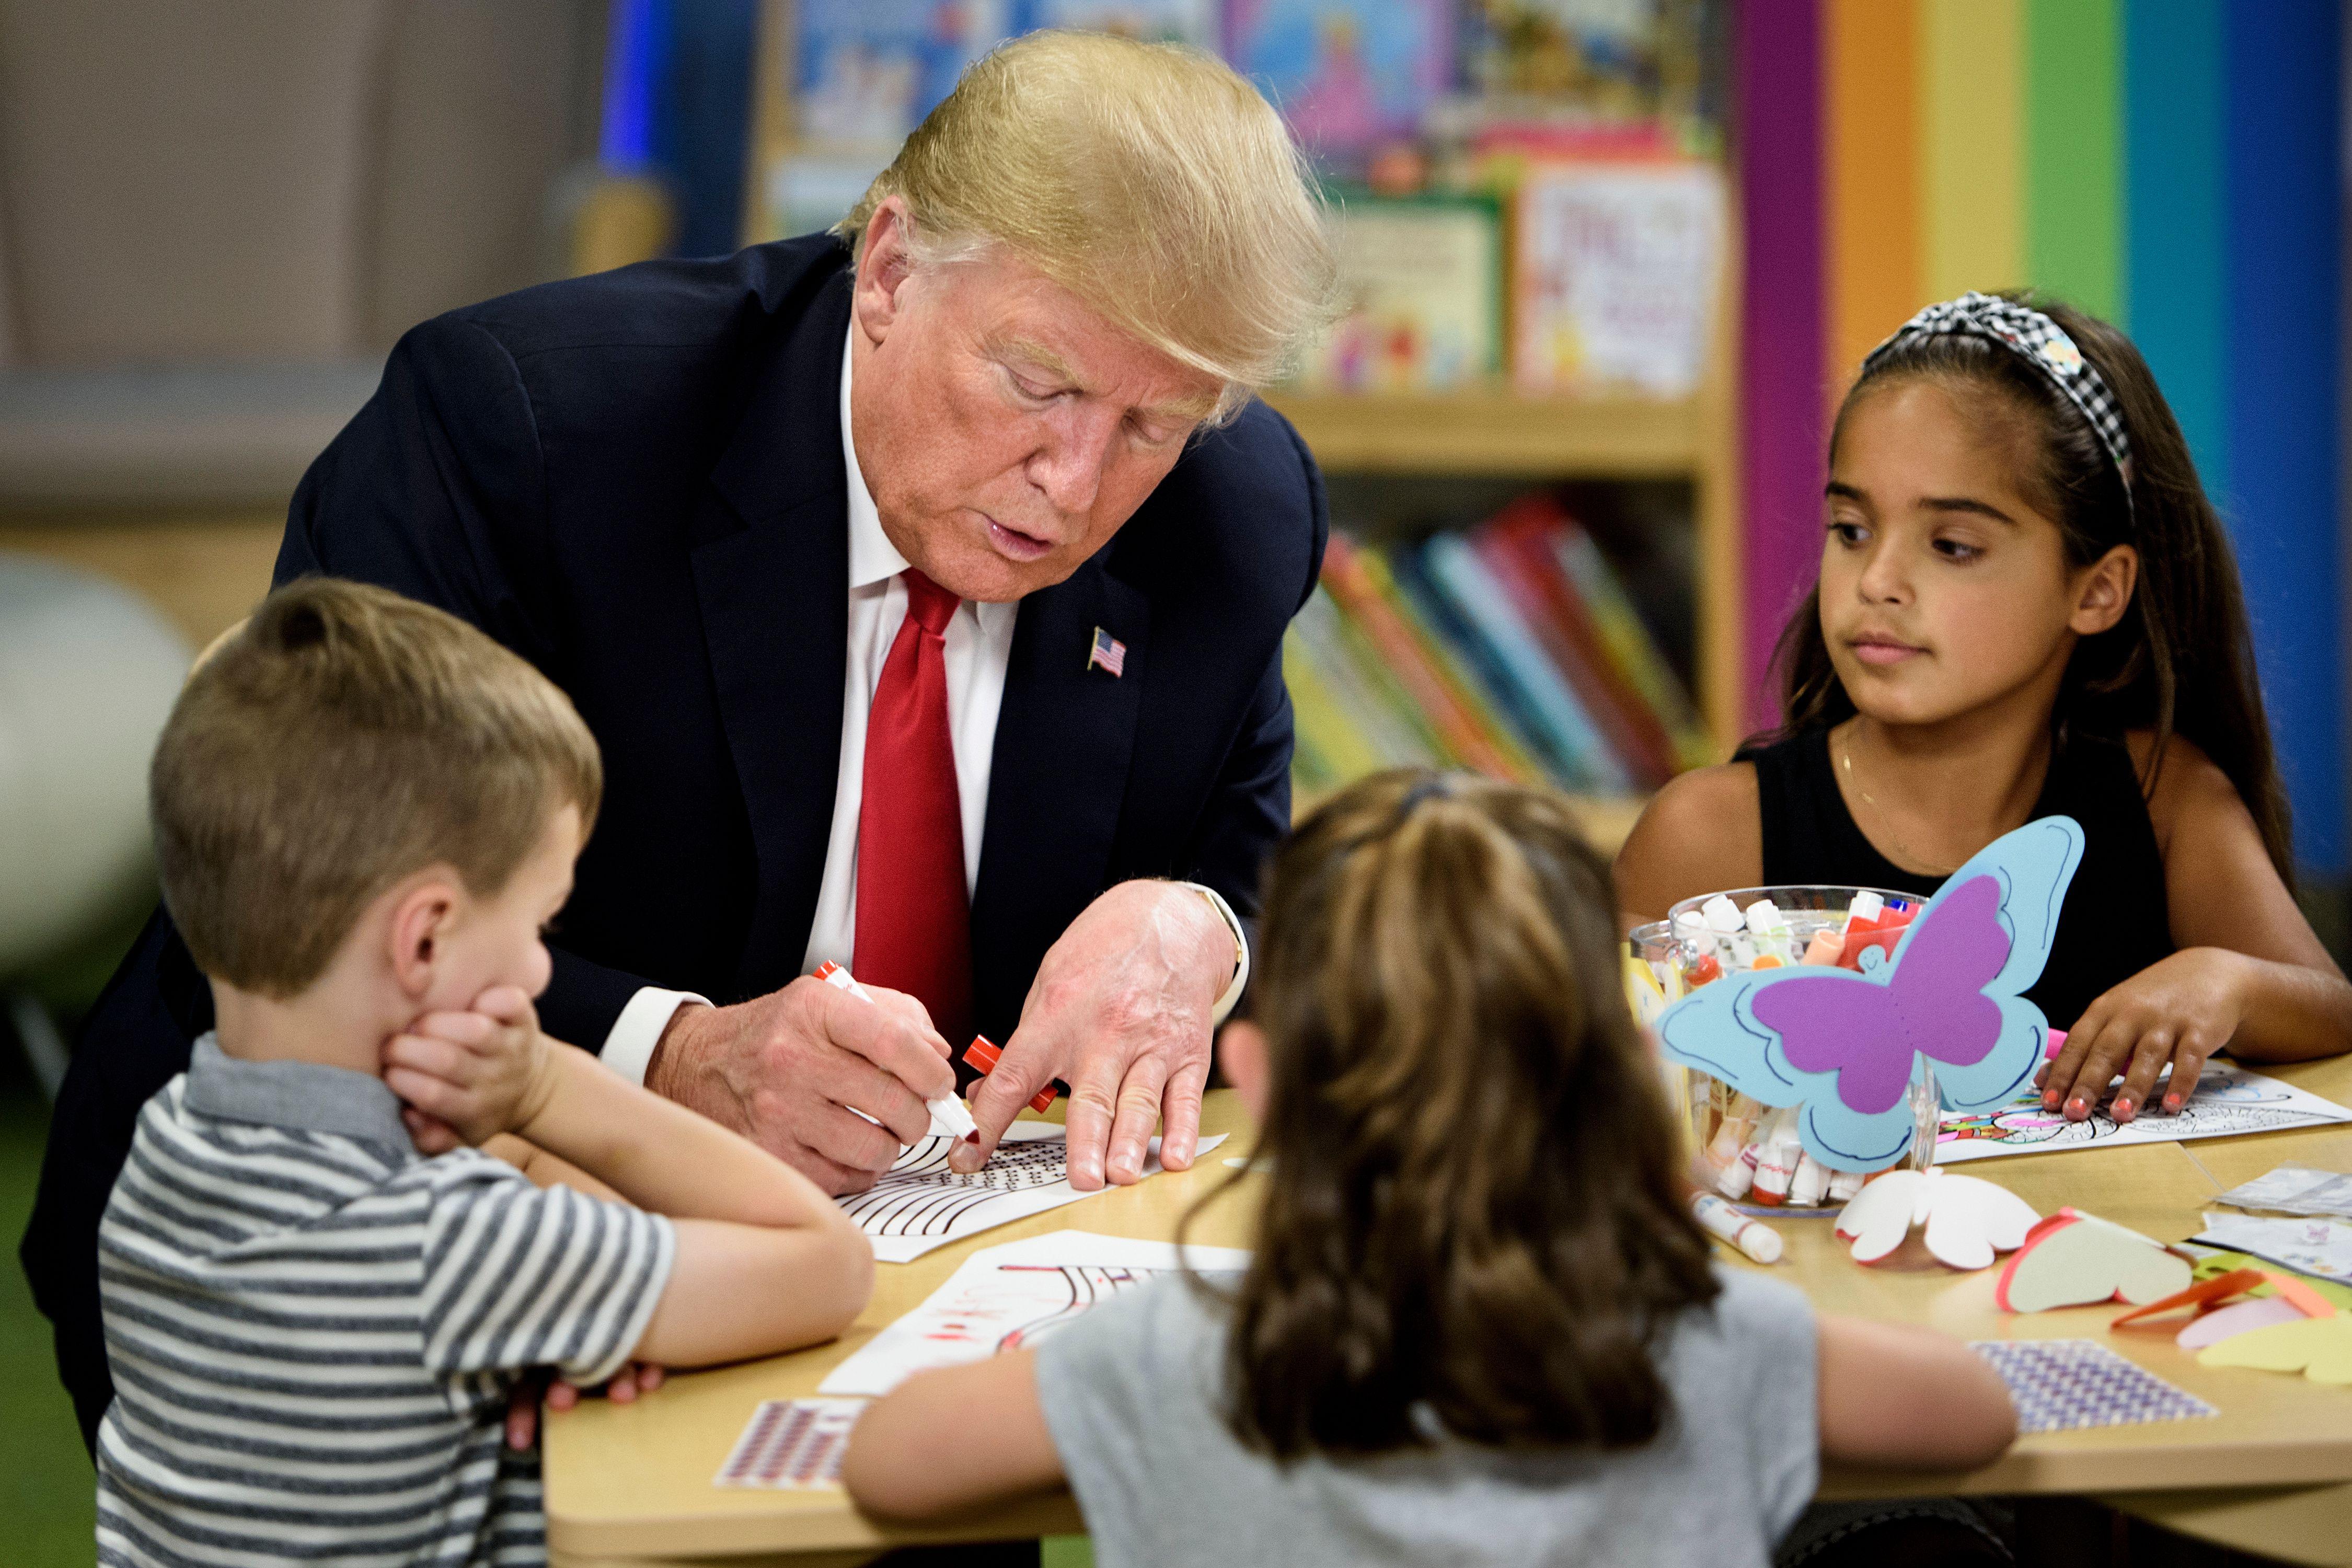 President Donald Trump colors in an American flag while children seated around him look on and color.